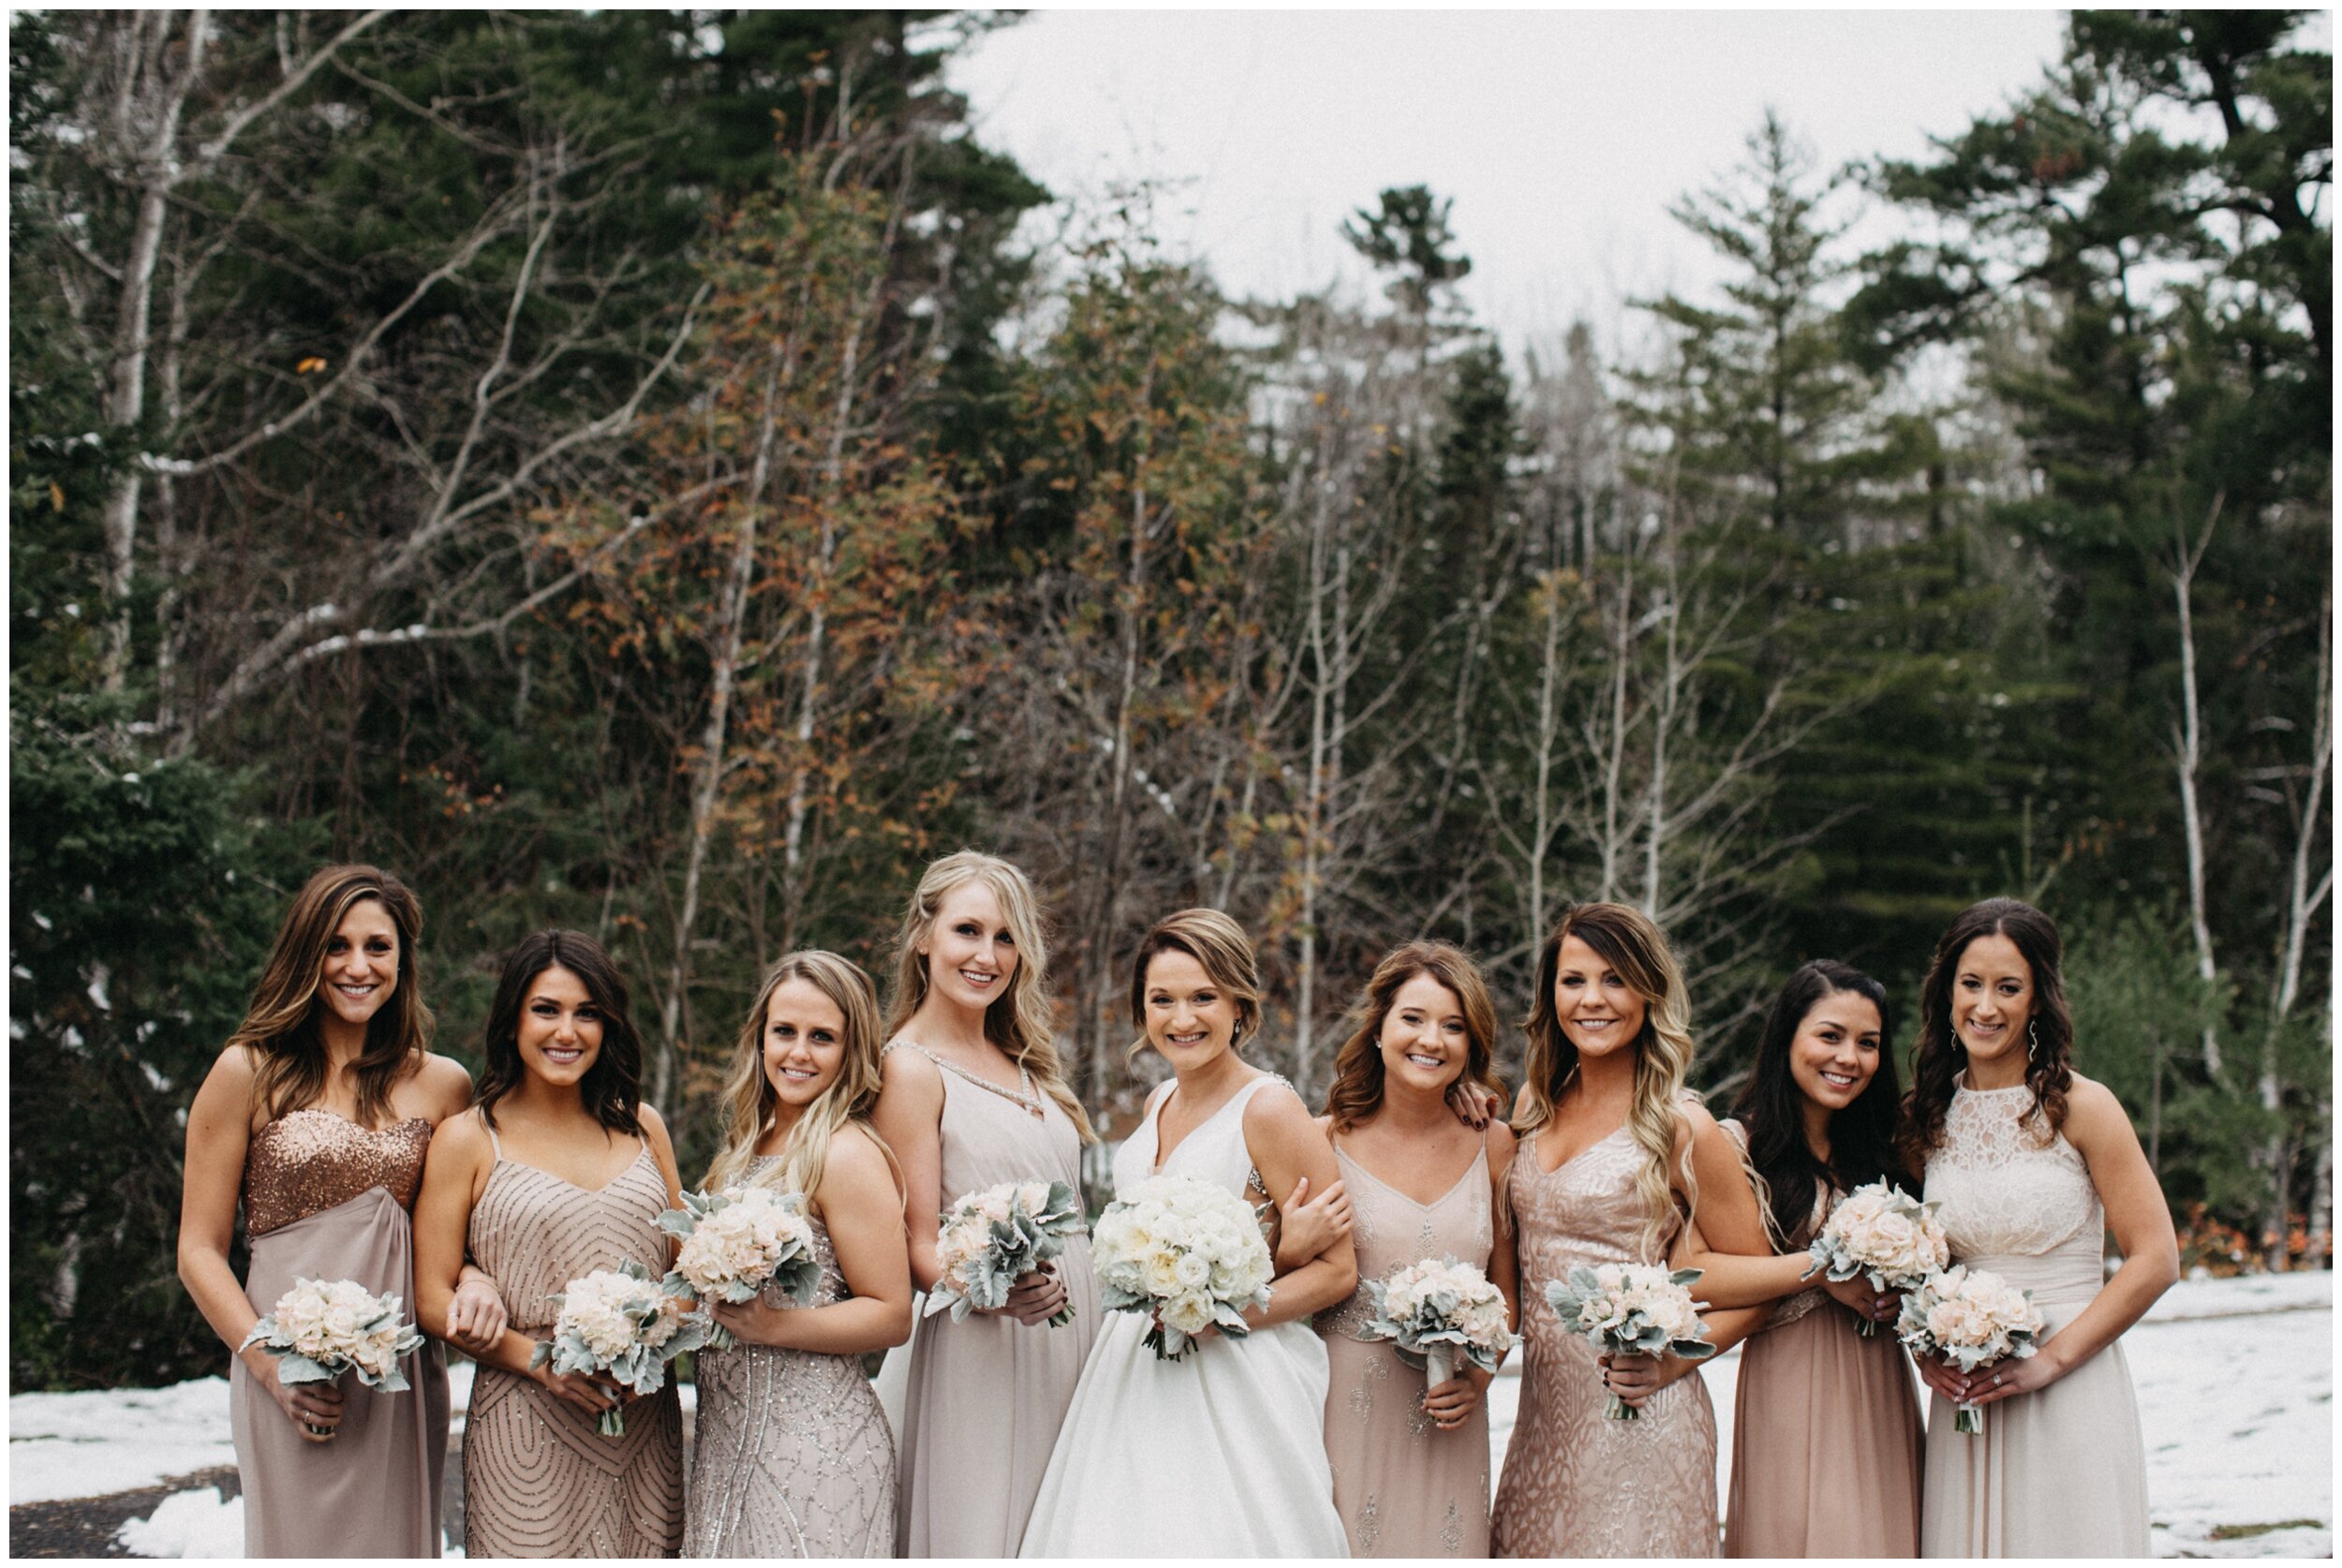 Bride with bridesmaids at Lester Park in Duluth